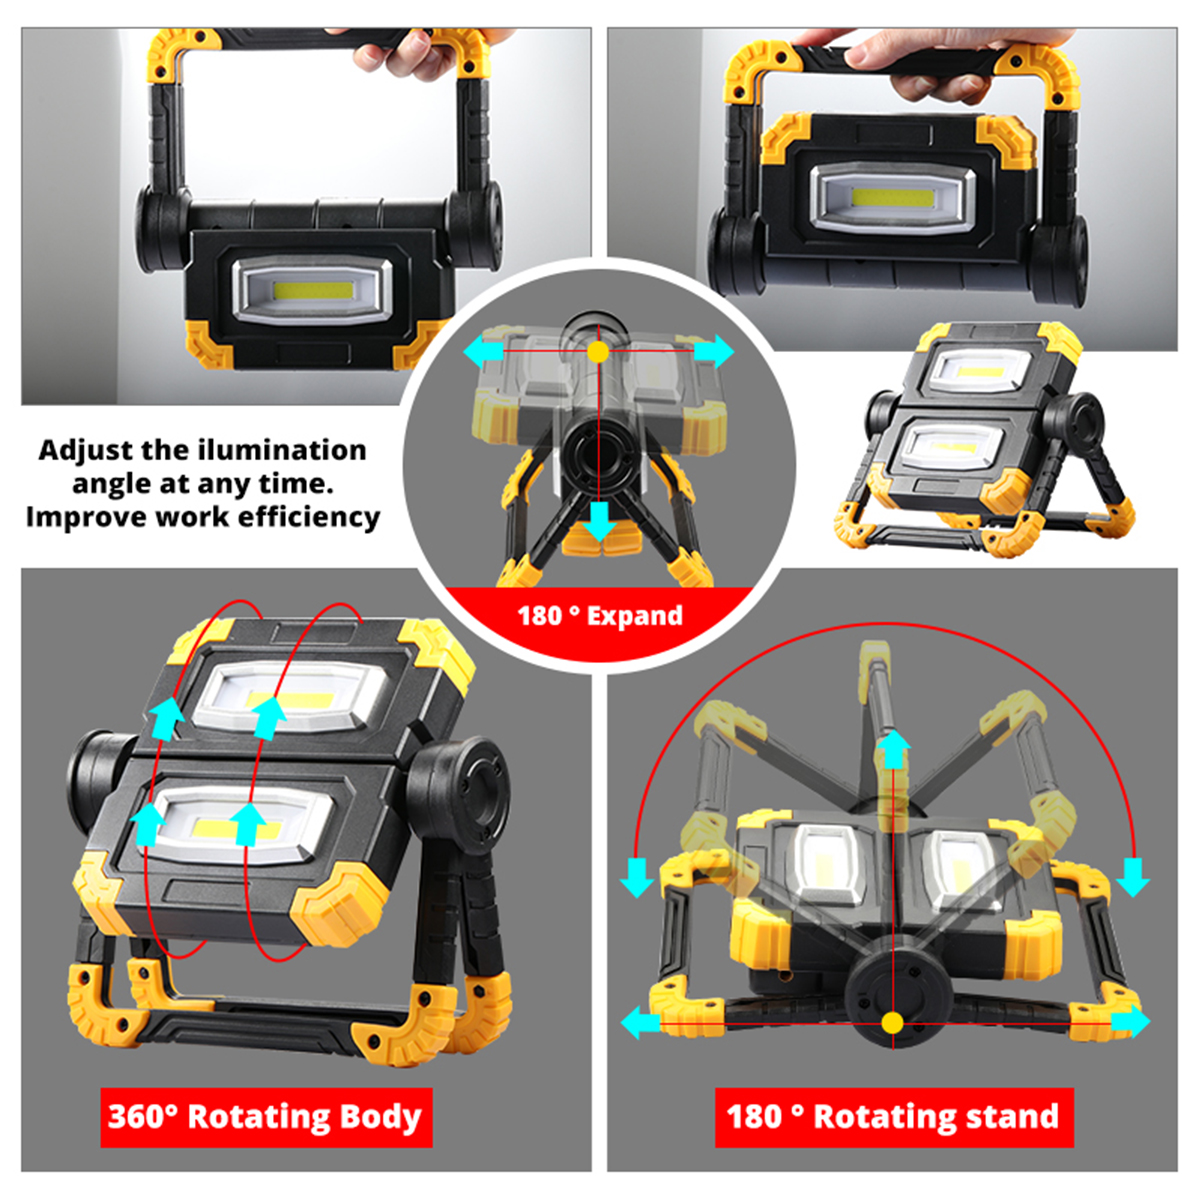 NEW-USB-Rechargeable-Outdoor-Portable-Work-Lamp-Searchlight-Double-Head-COB-Camping-Light-Anti-fall--1935148-3